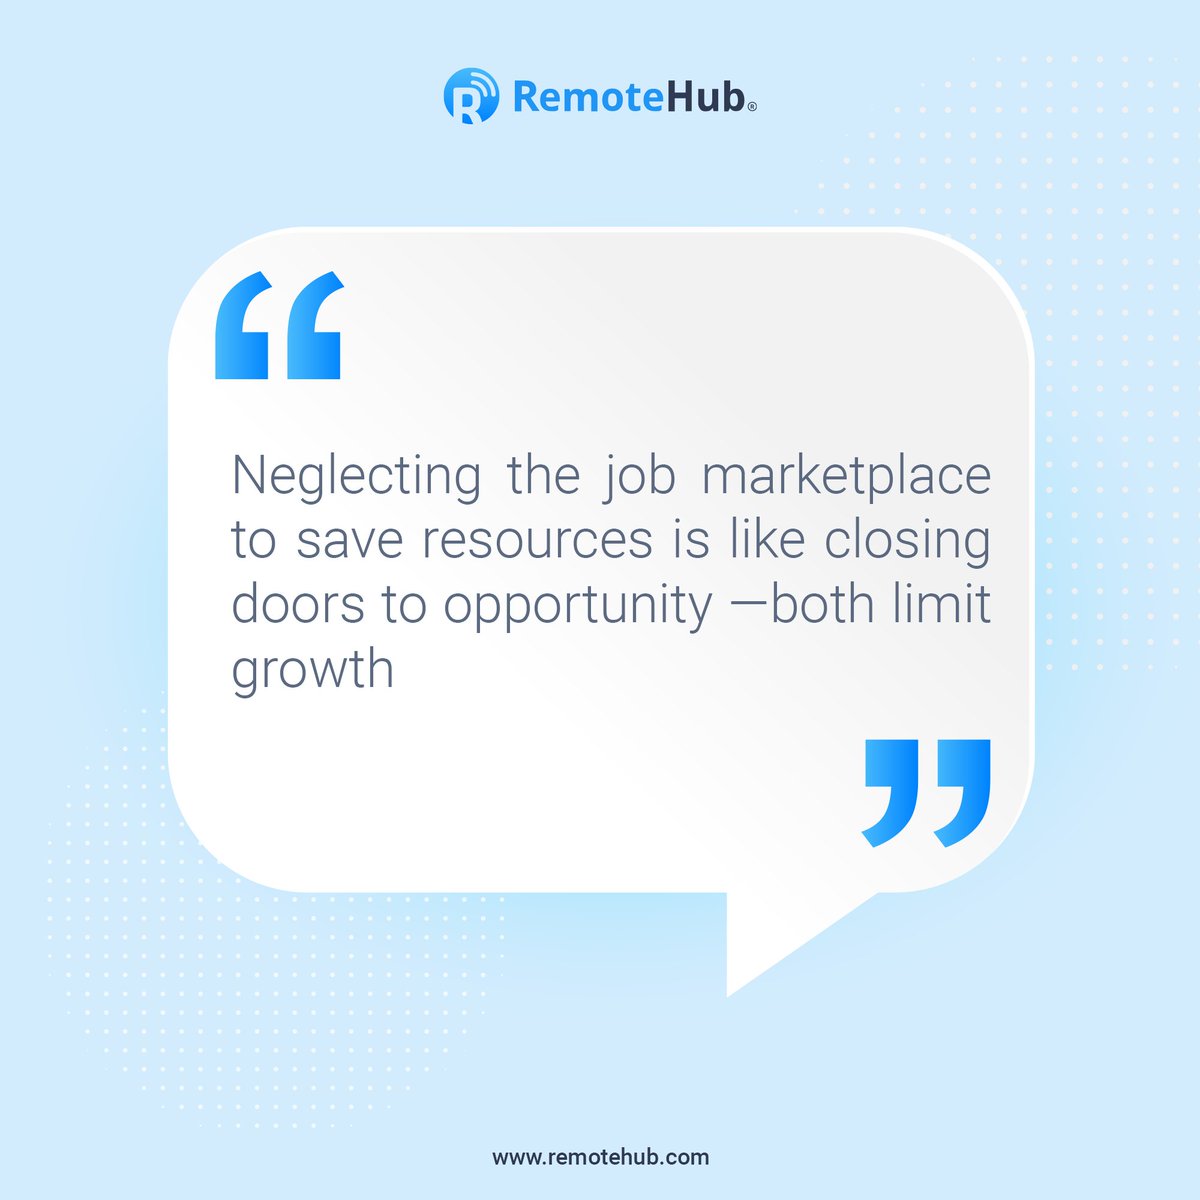 Opportunities abound in the job marketplace. Don't limit your growth by neglecting it. Keep the doors open to success! 😊

#JobMarket #GrowthOpportunities #JobMarketplace #RemoteHub #MotivationDose #YourHiringPartner